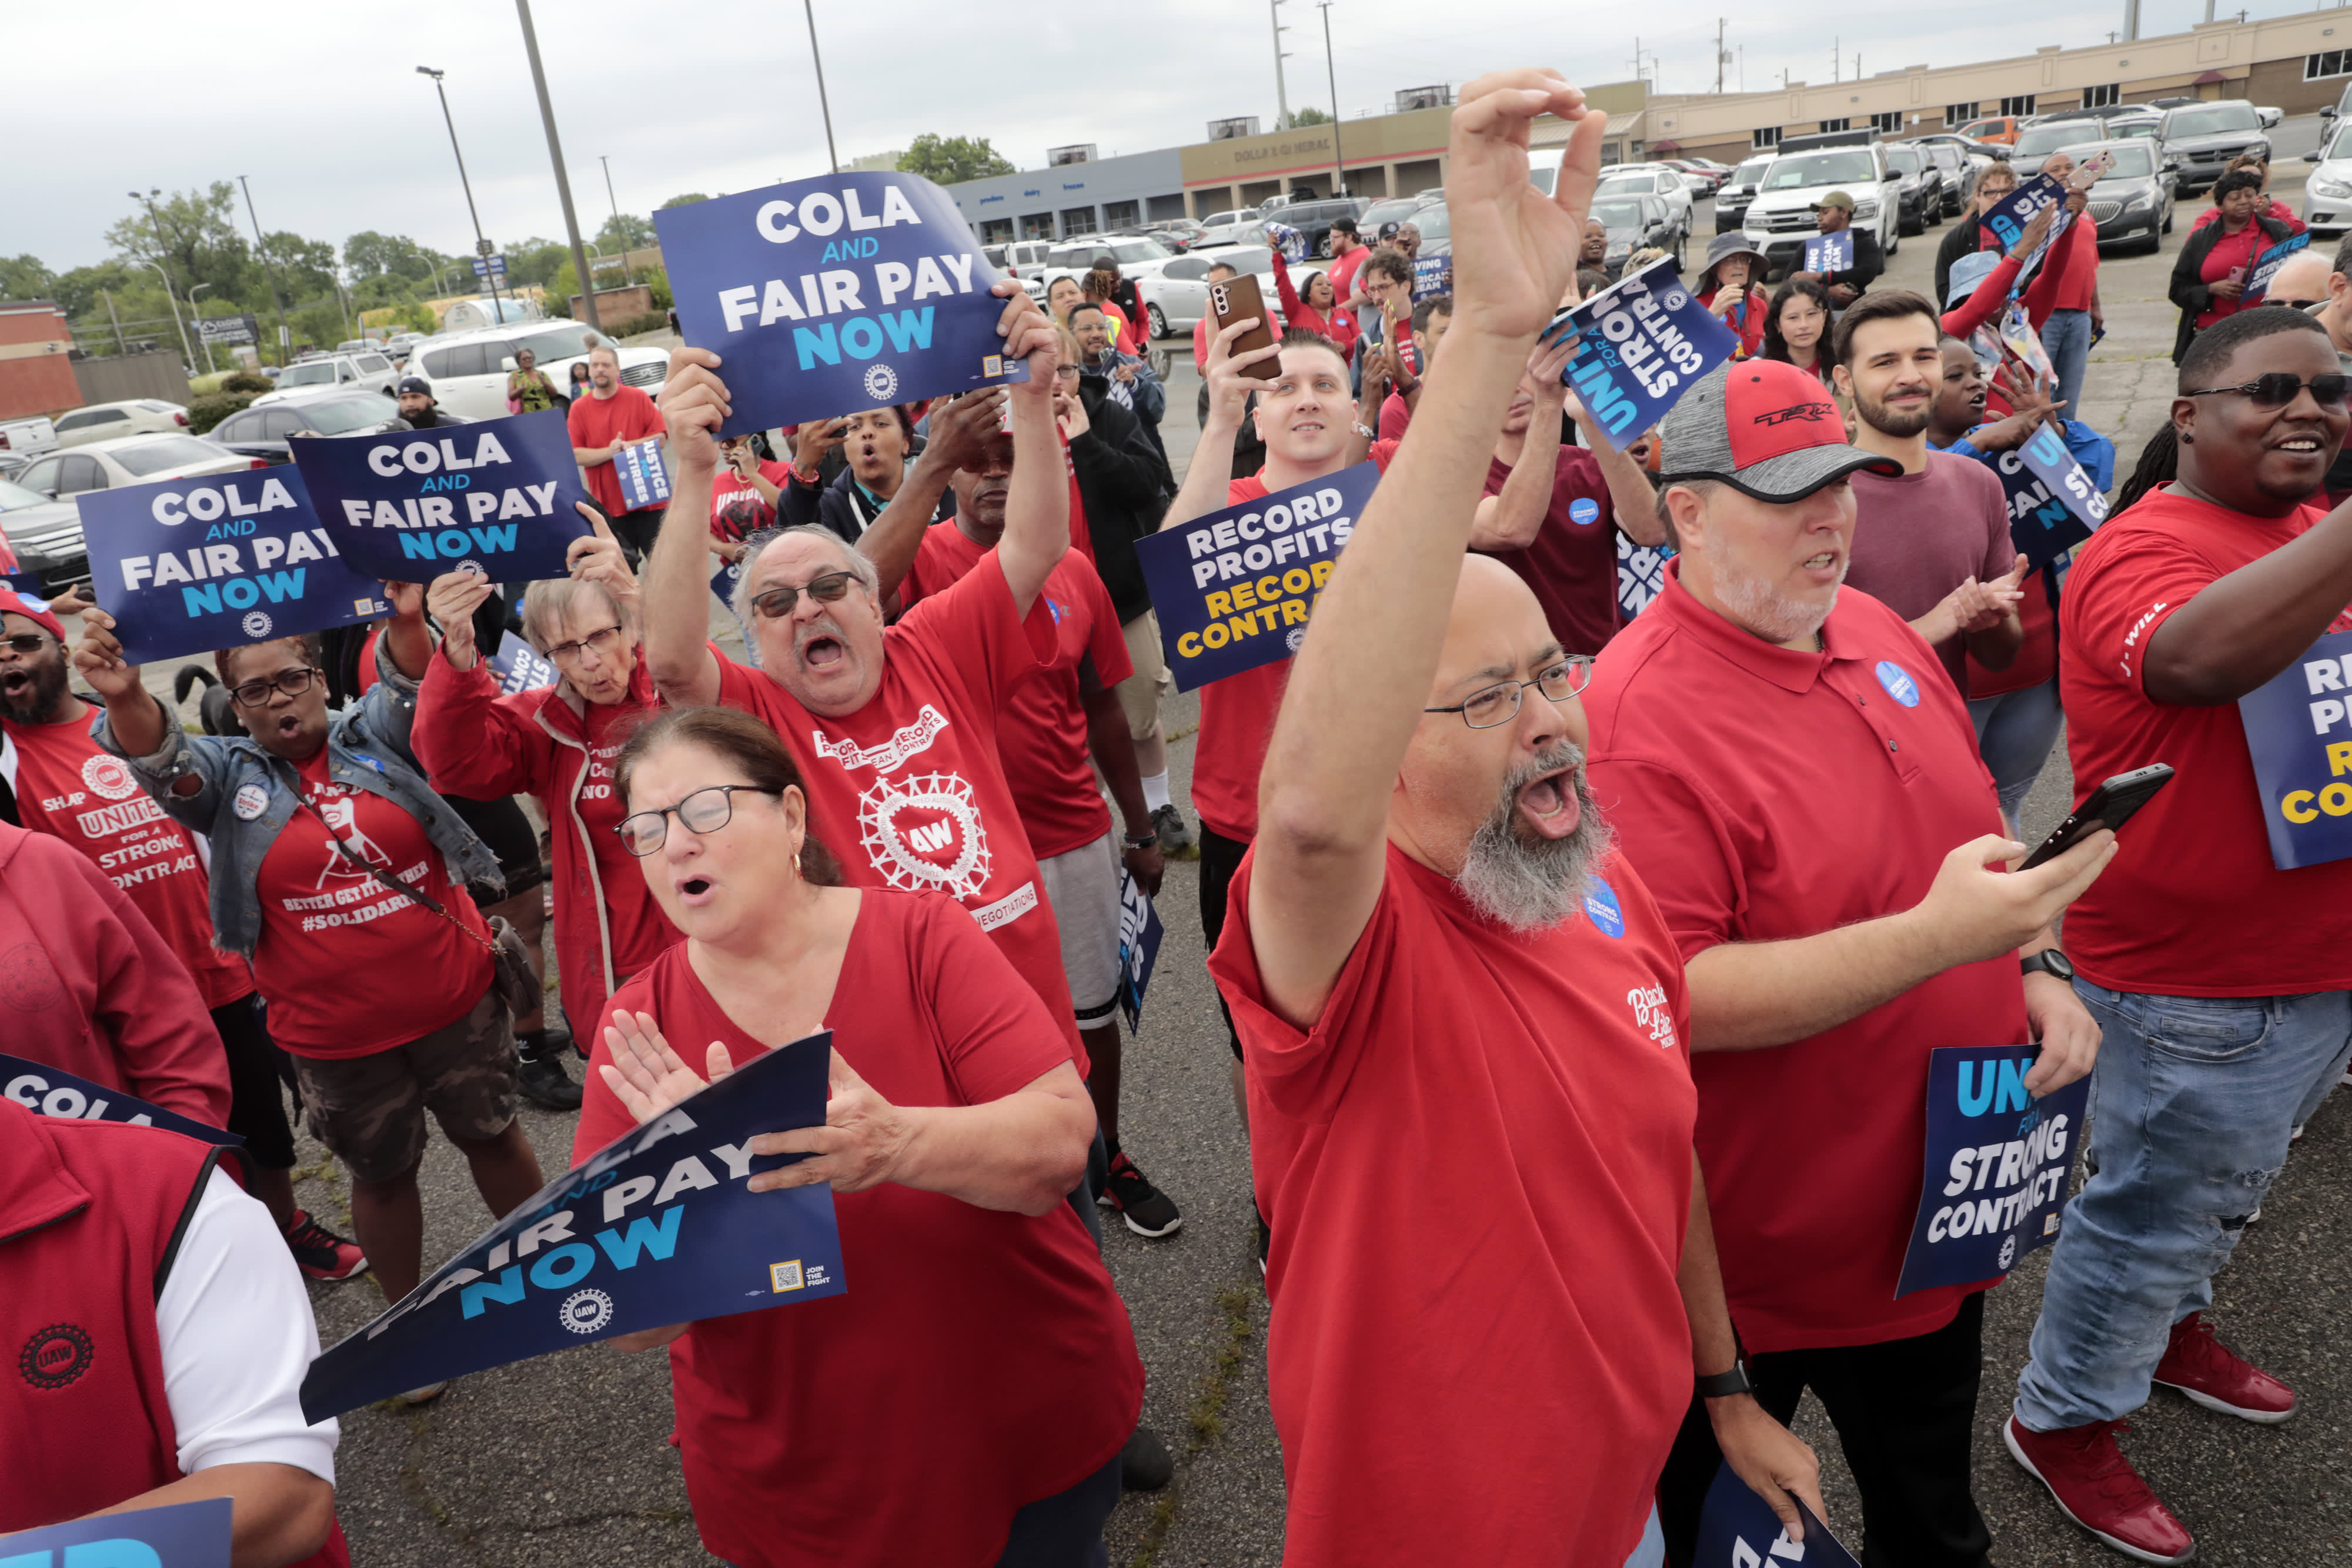 Stellantis is offering a 14.5% salary increase to the UAW, days before the potential strike